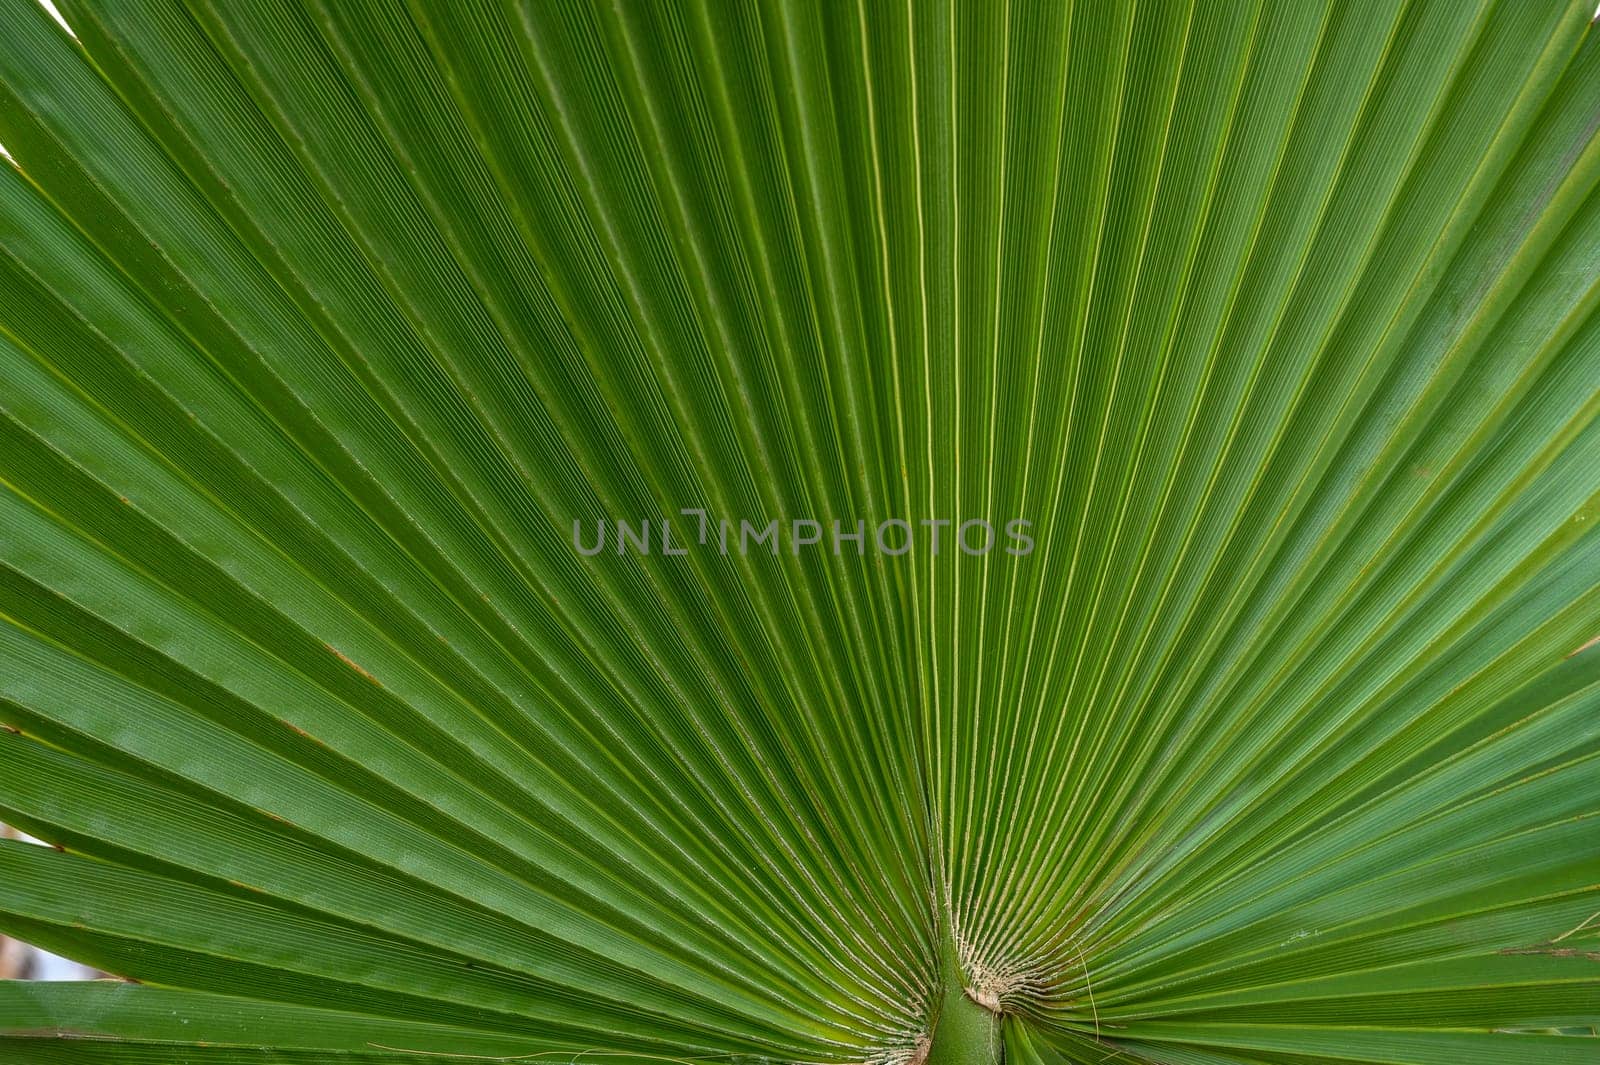 palm leaf as a background for photos 1 by Mixa74